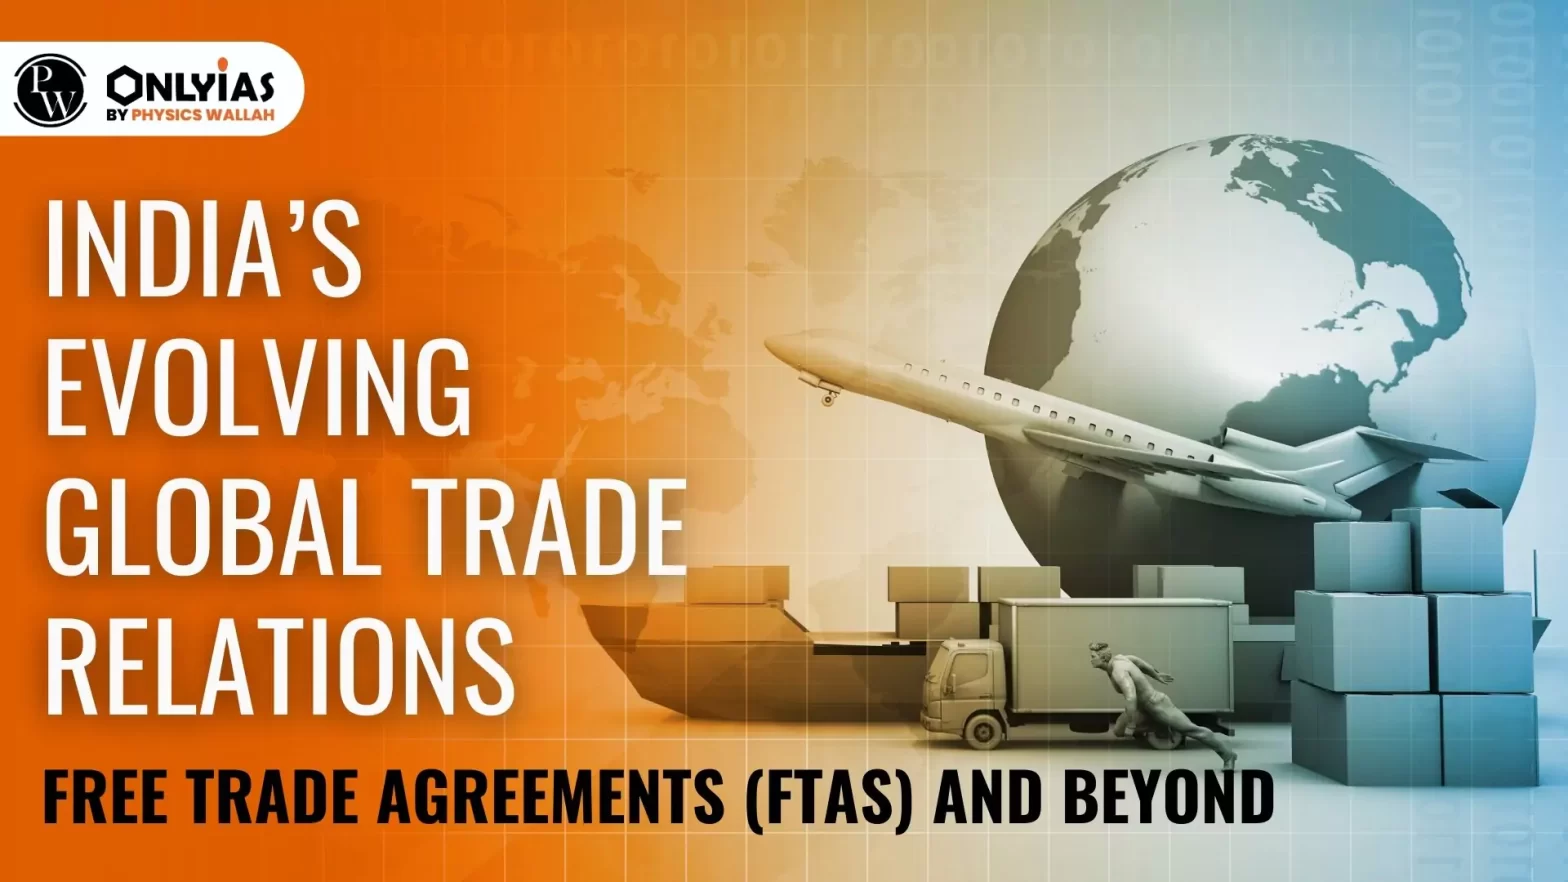 India’s Evolving Global Trade Relations:  Free Trade Agreements (FTAs) and Beyond